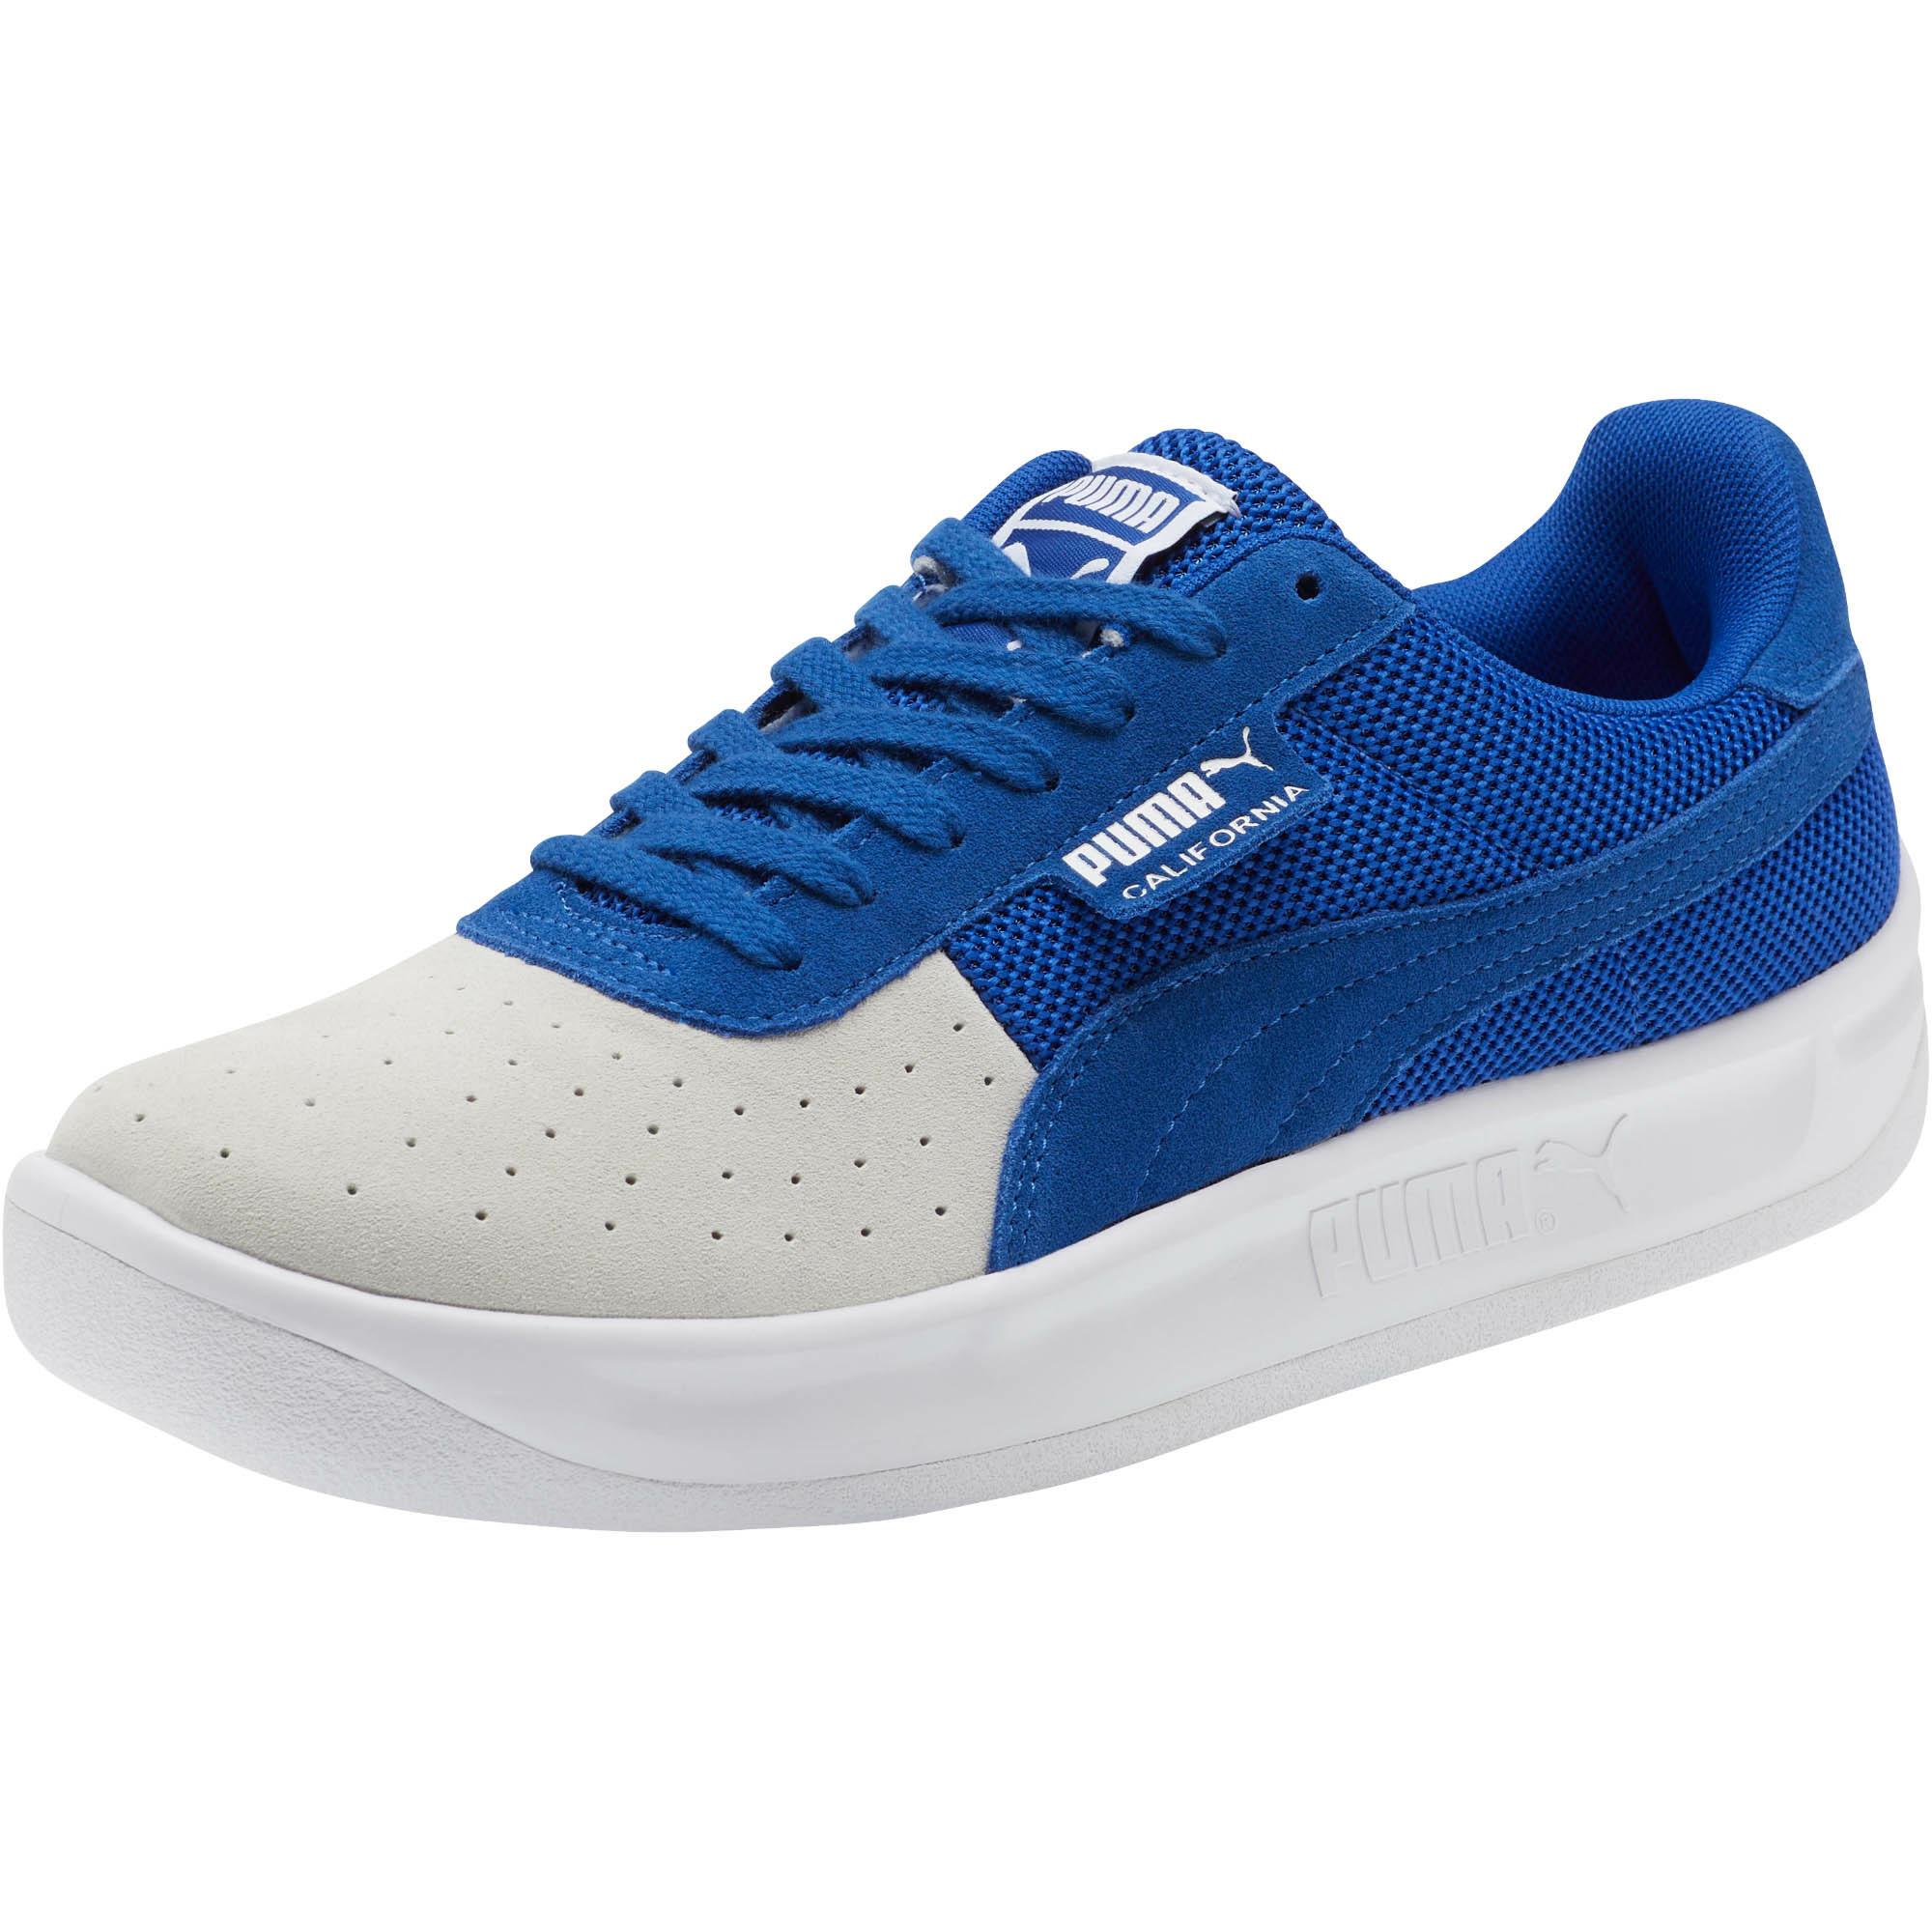 PUMA Suede California Summer Sneakers in White (Blue) for Men - Lyst